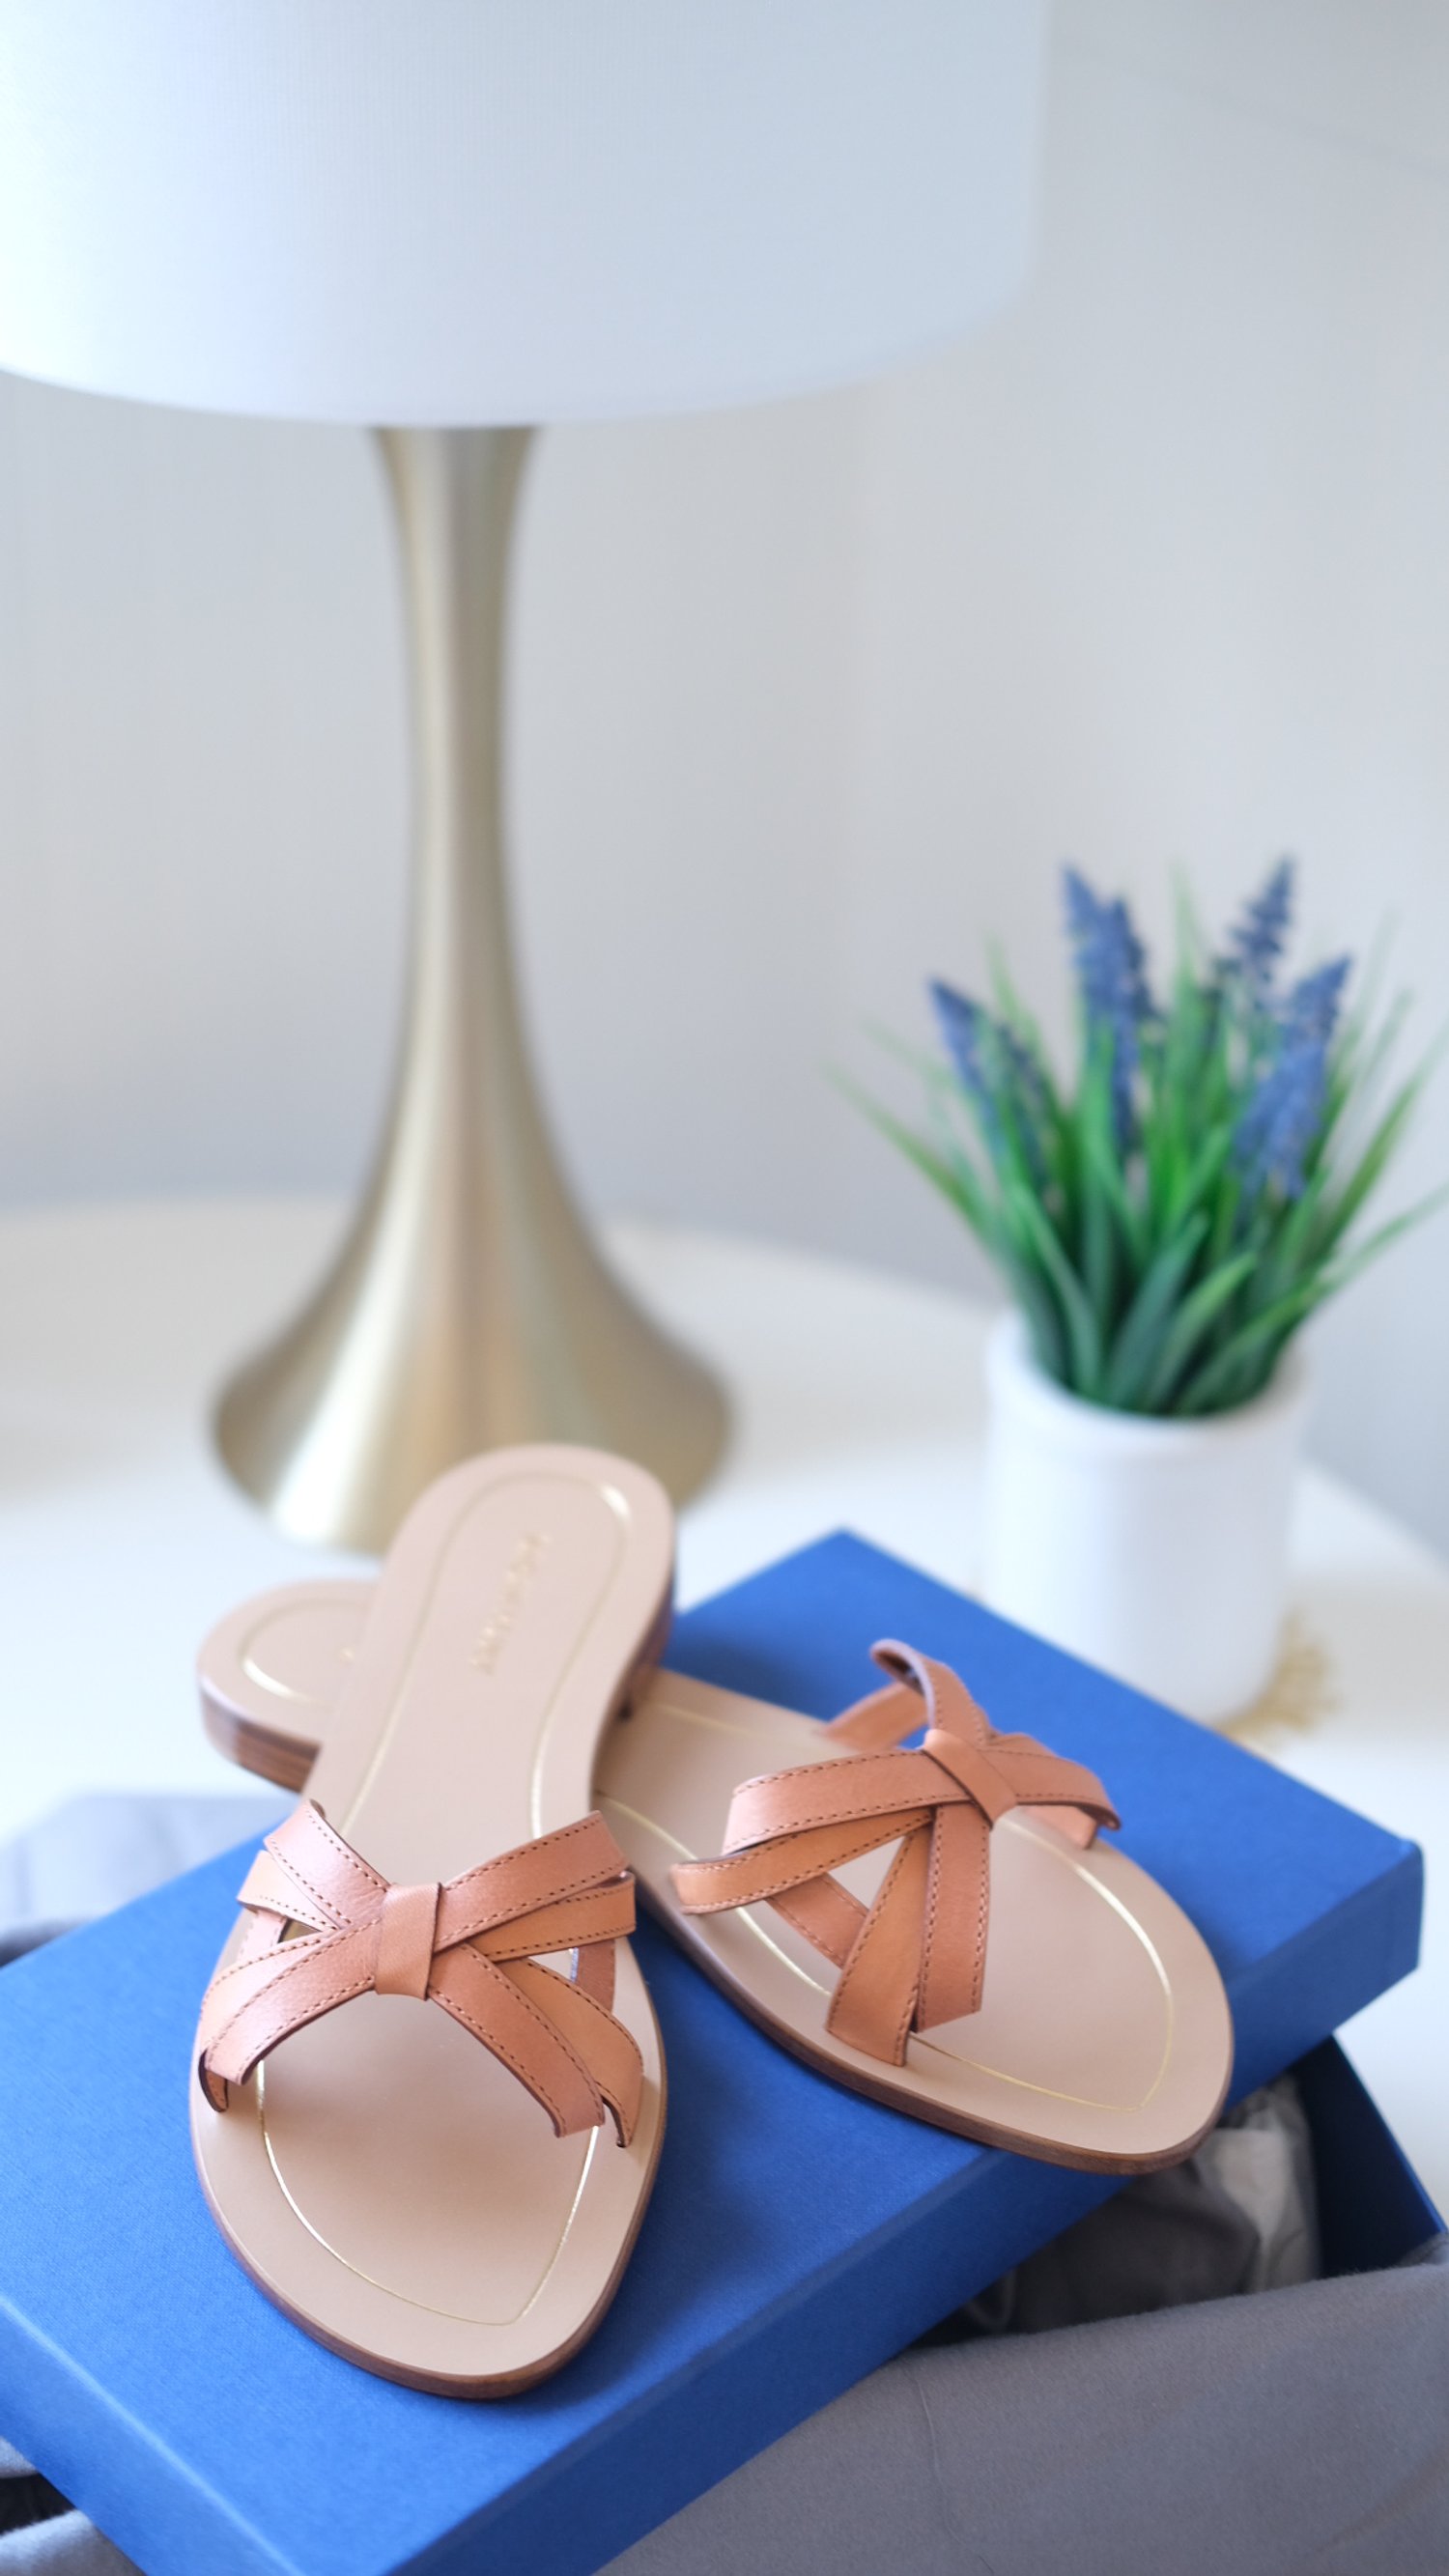 In this honest Sarah Flint Review, you will find my Sarah Flint shoes review. I heard so much about Sarah Flint shoes before finally getting my own pair of Sarah Flint sandals. The best thing about this Sarah Flint review? Sarah Flint coupon code